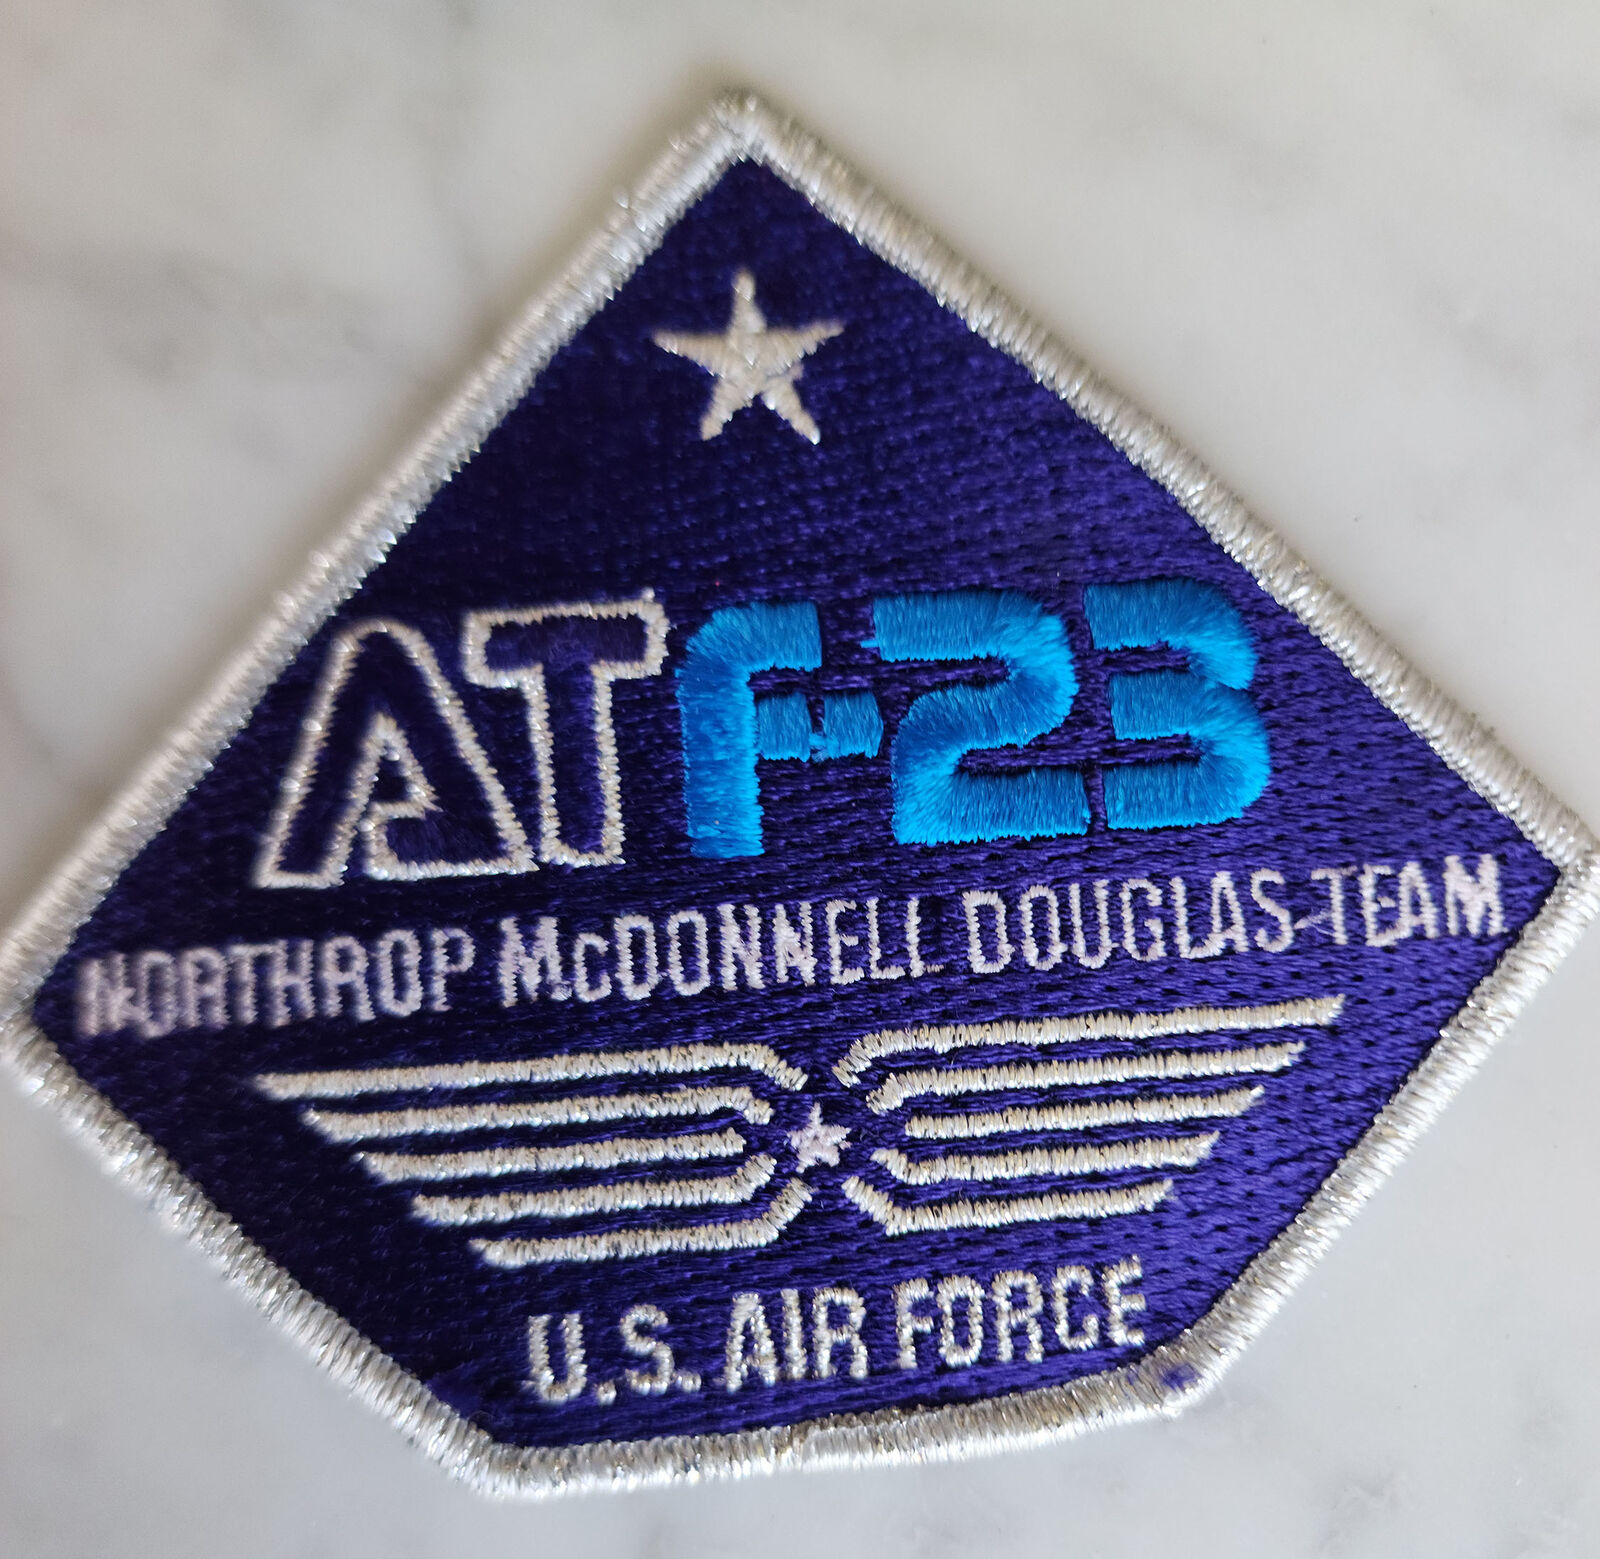 Vintage AT F-23 Northrop McDonnell Douglas Team U.S Air Force Embroidered Patch